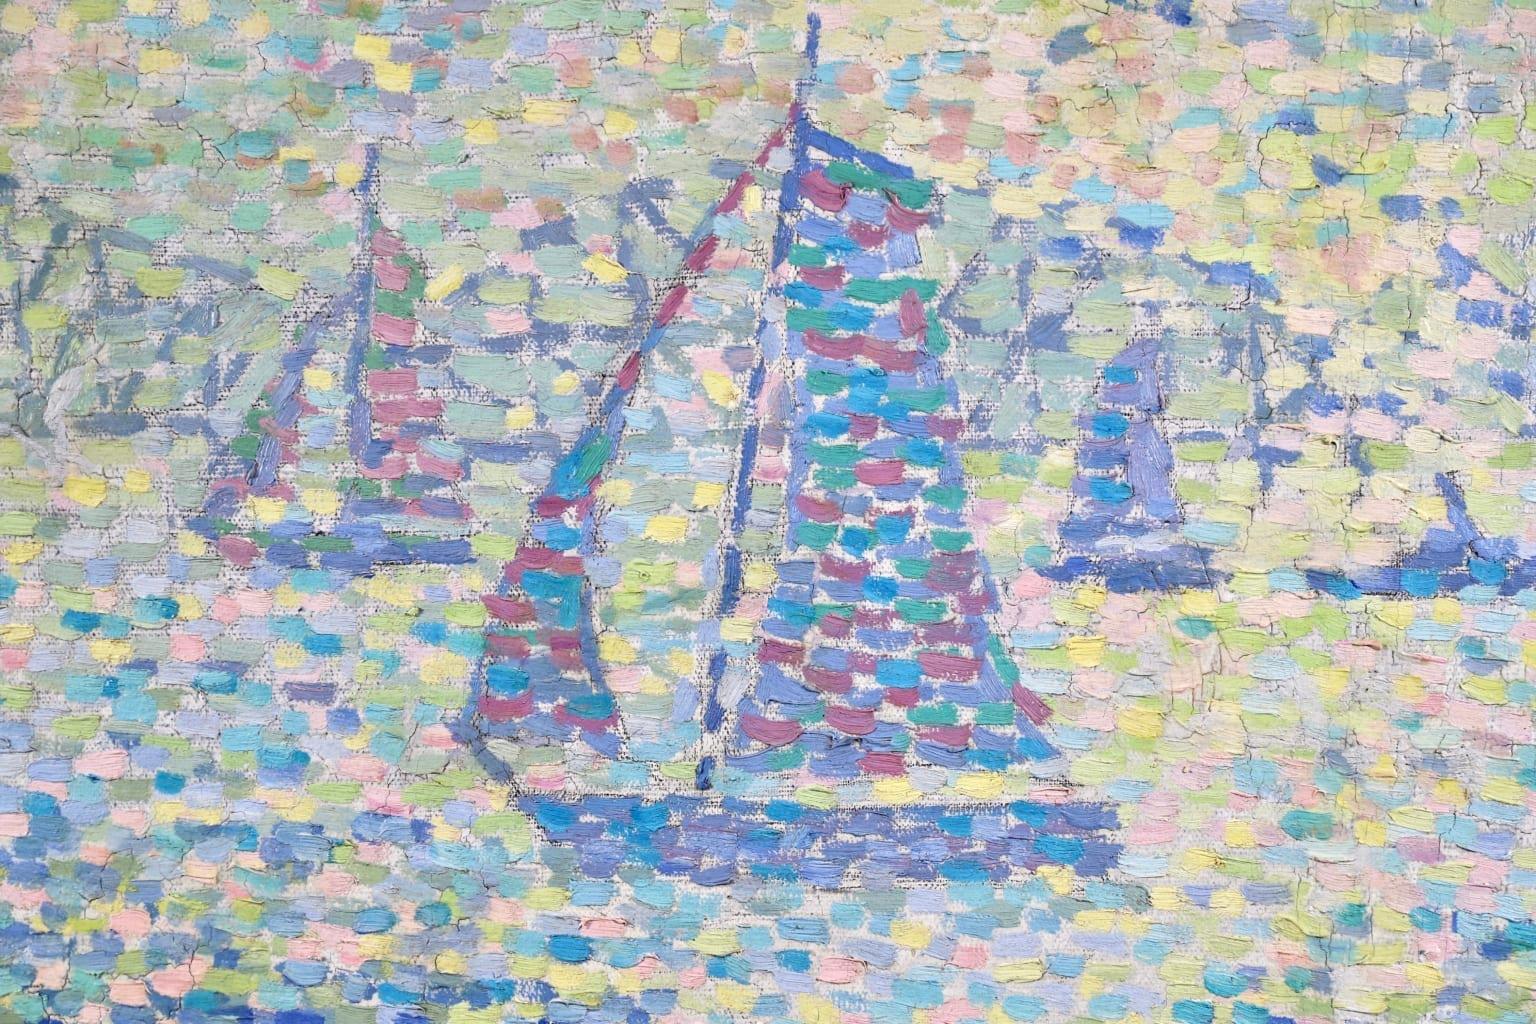 A simply beautiful pointillist oil on canvas by French neo-impressionist painter Jeanne Selmersheim-Desgrange. The artist was the wife of Paul Signac who heavily influenced her work. The piece is painted in mostly blue tones with purples, pinks and